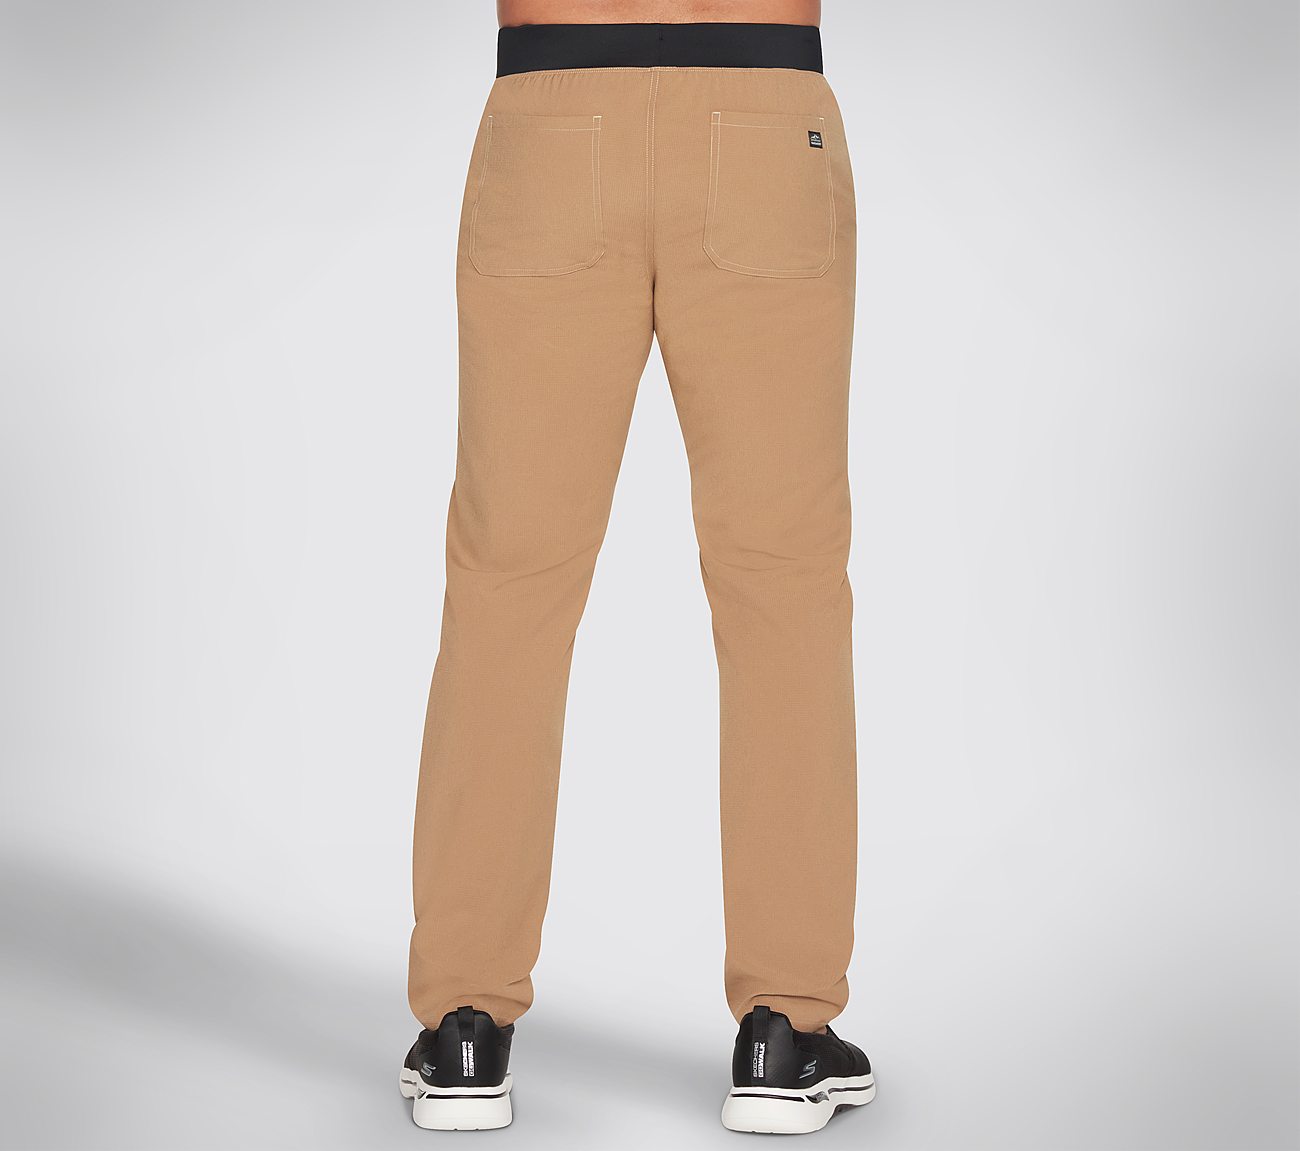 THE GOWALK PANT TEARSTOP, TTAUPE Apparels Top View